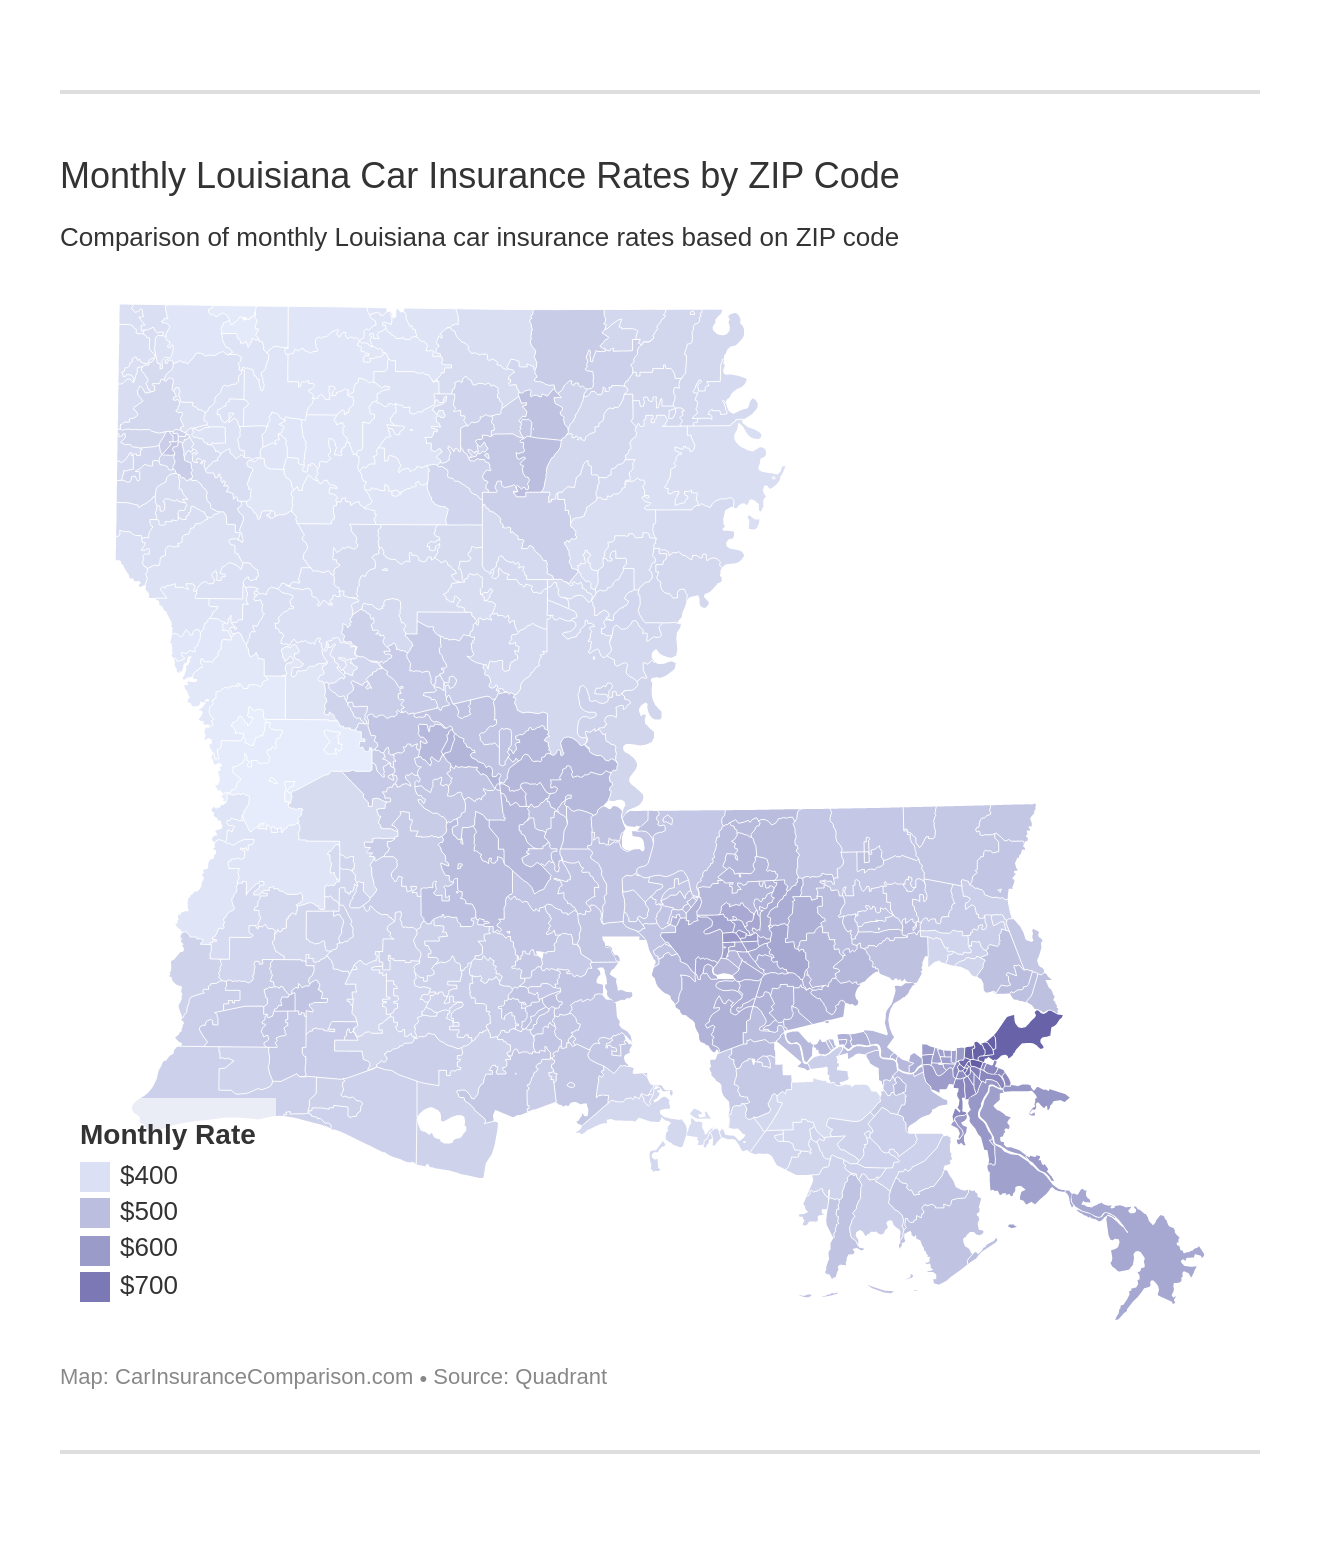 Monthly Louisiana Car Insurance Rates by ZIP Code